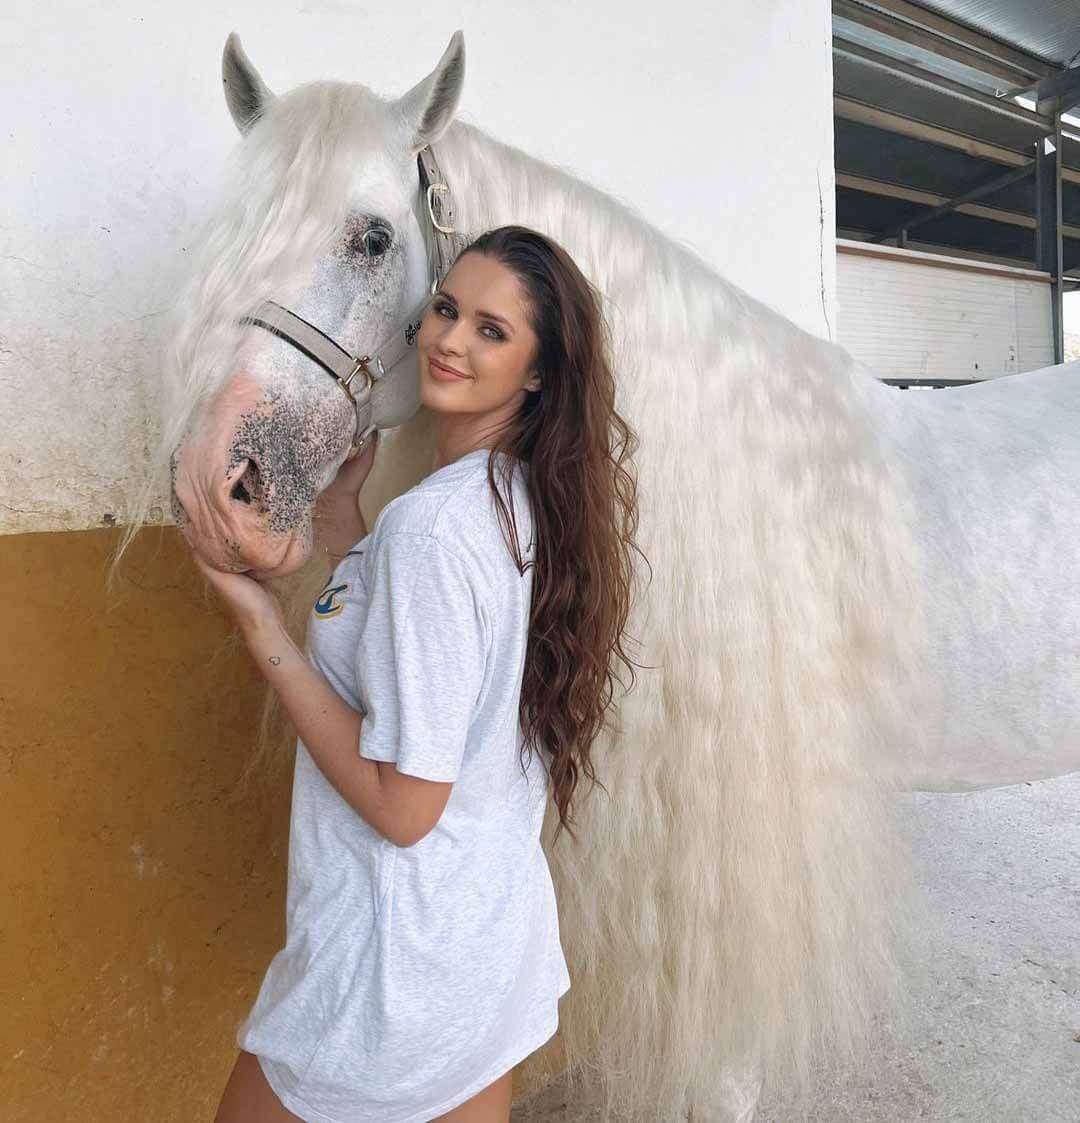 Erin-Williams wearing a white , grey mix t-shirt while twining with her adorable horse